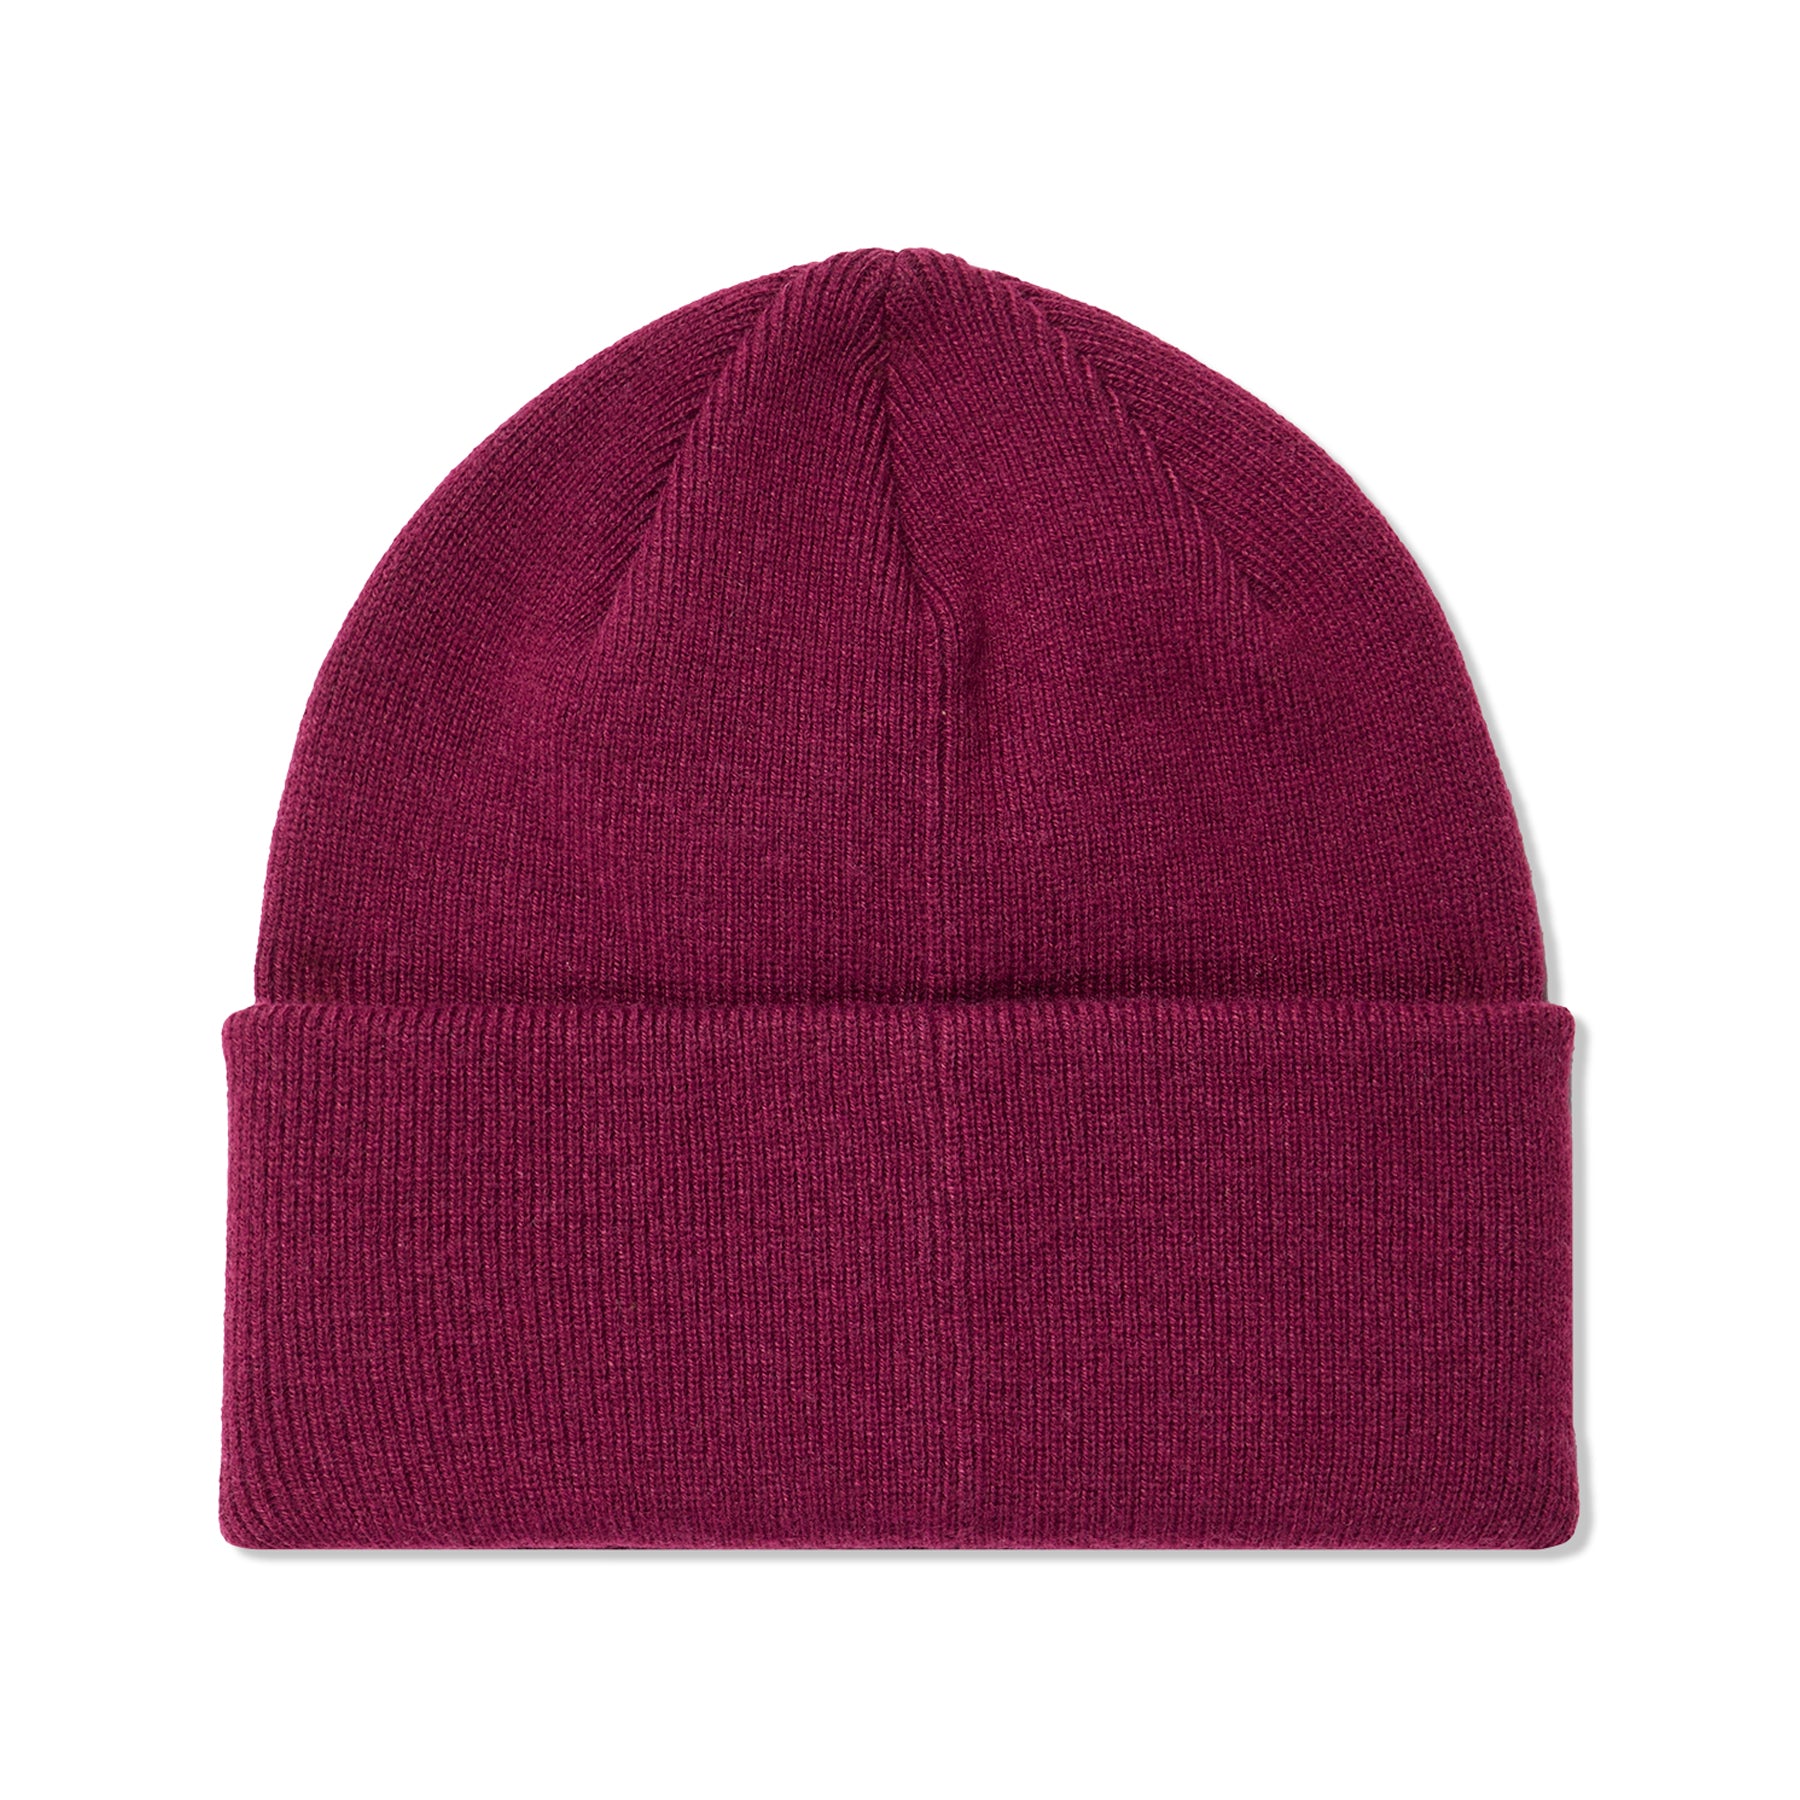 The North Face Beanie Urban Concepts Boysenberry) – Embossed